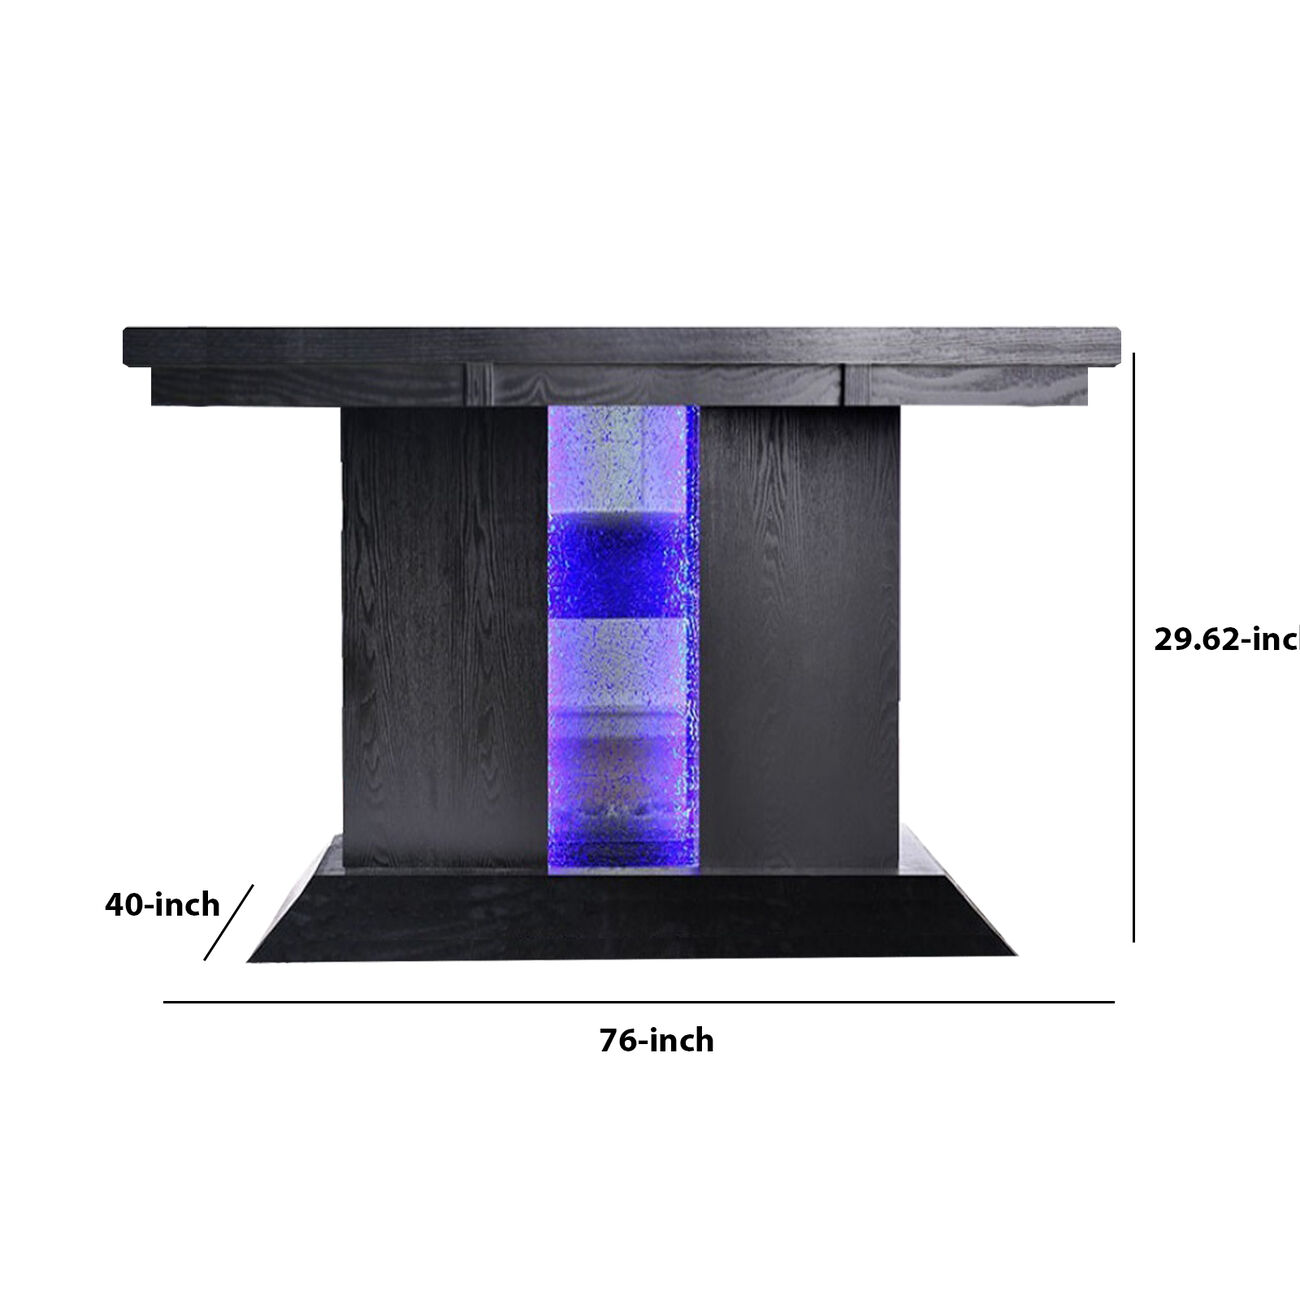 Wooden Dining Table with Pedestal Base Legs and LED Light, Black